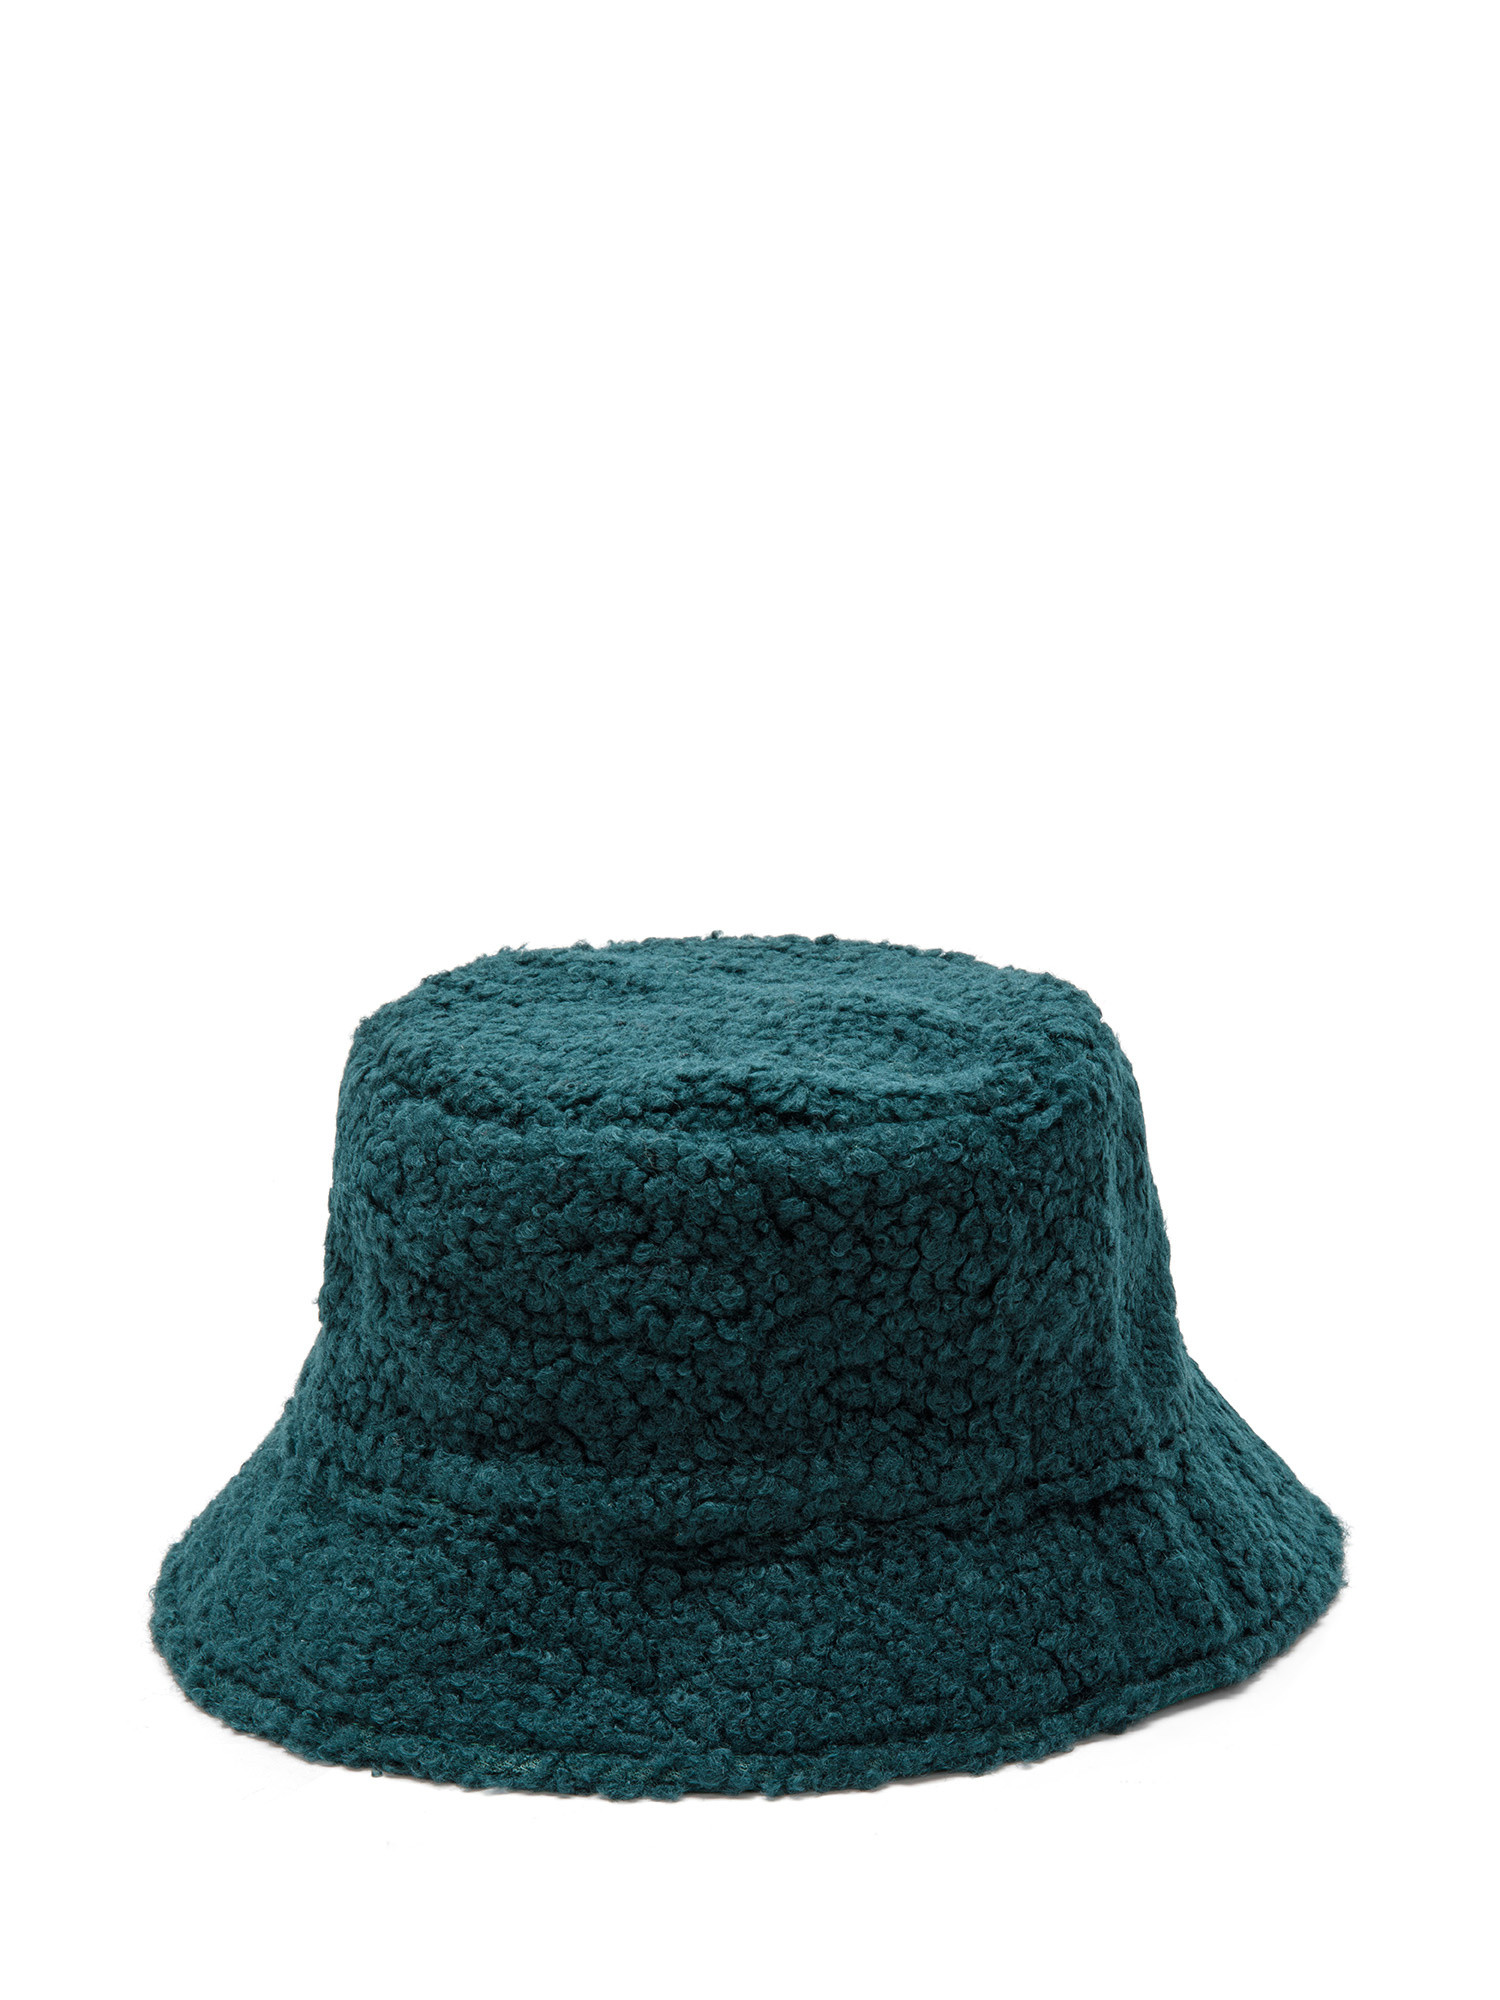 Koan - Cappello orsetto, Verde, large image number 0